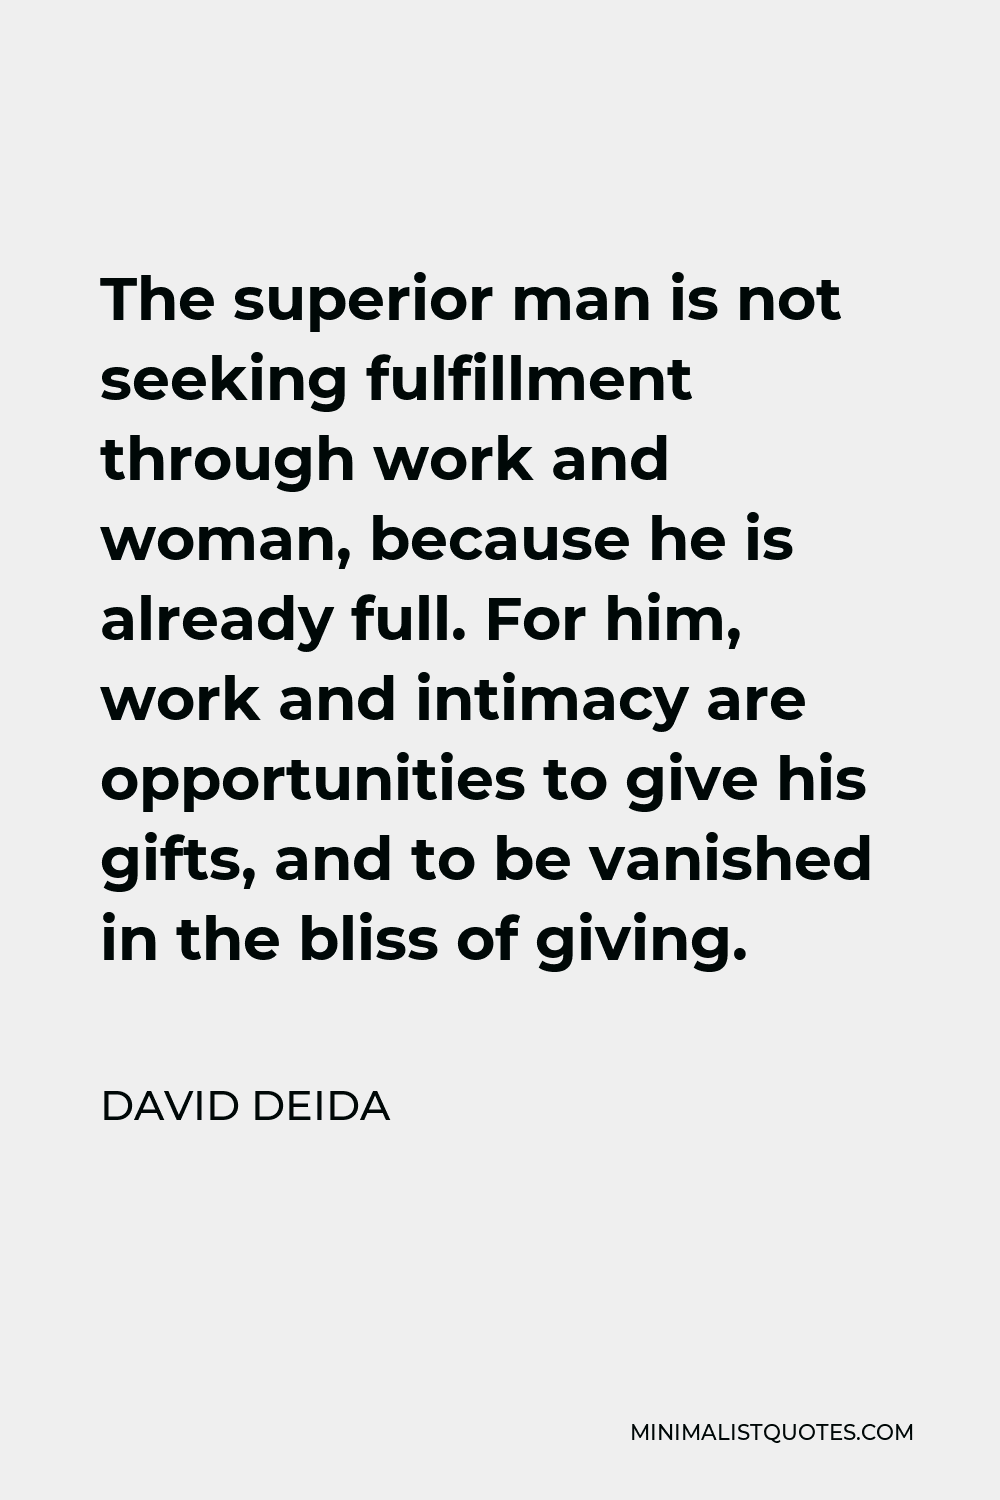 David Deida Quote - The superior man is not seeking fulfillment through work and woman, because he is already full. For him, work and intimacy are opportunities to give his gifts, and to be vanished in the bliss of giving.